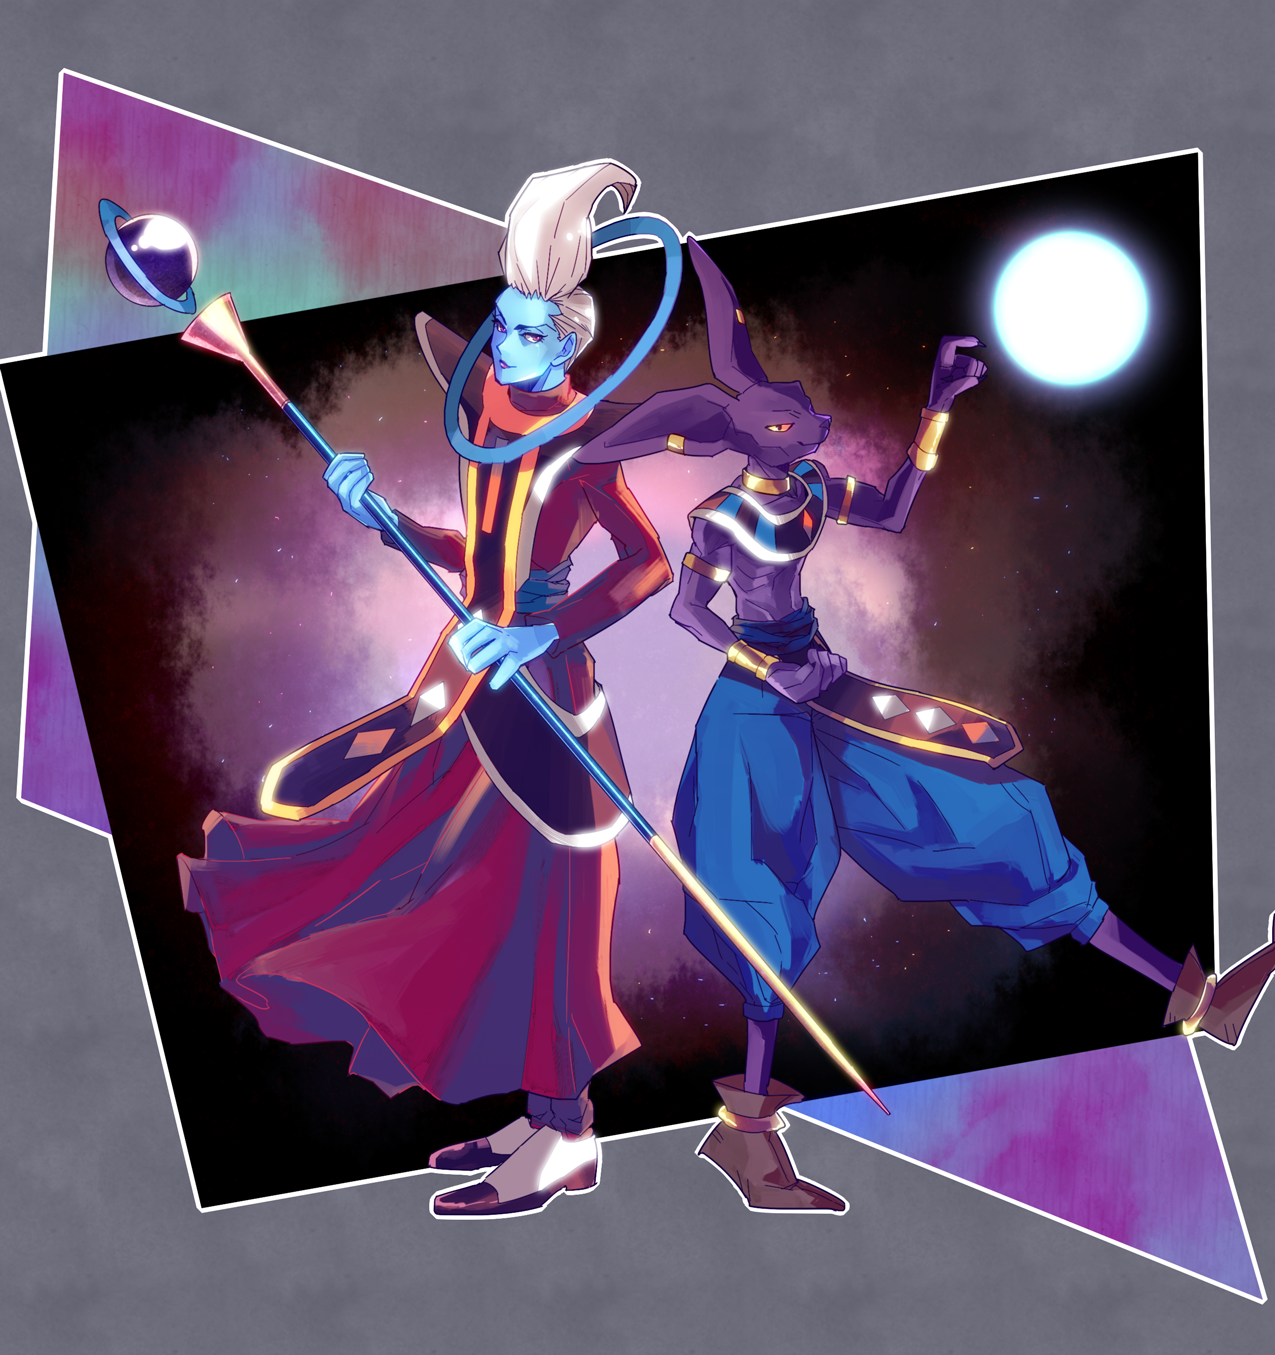 Beerus and Whis Art - ID: 73954 - Art Abyss